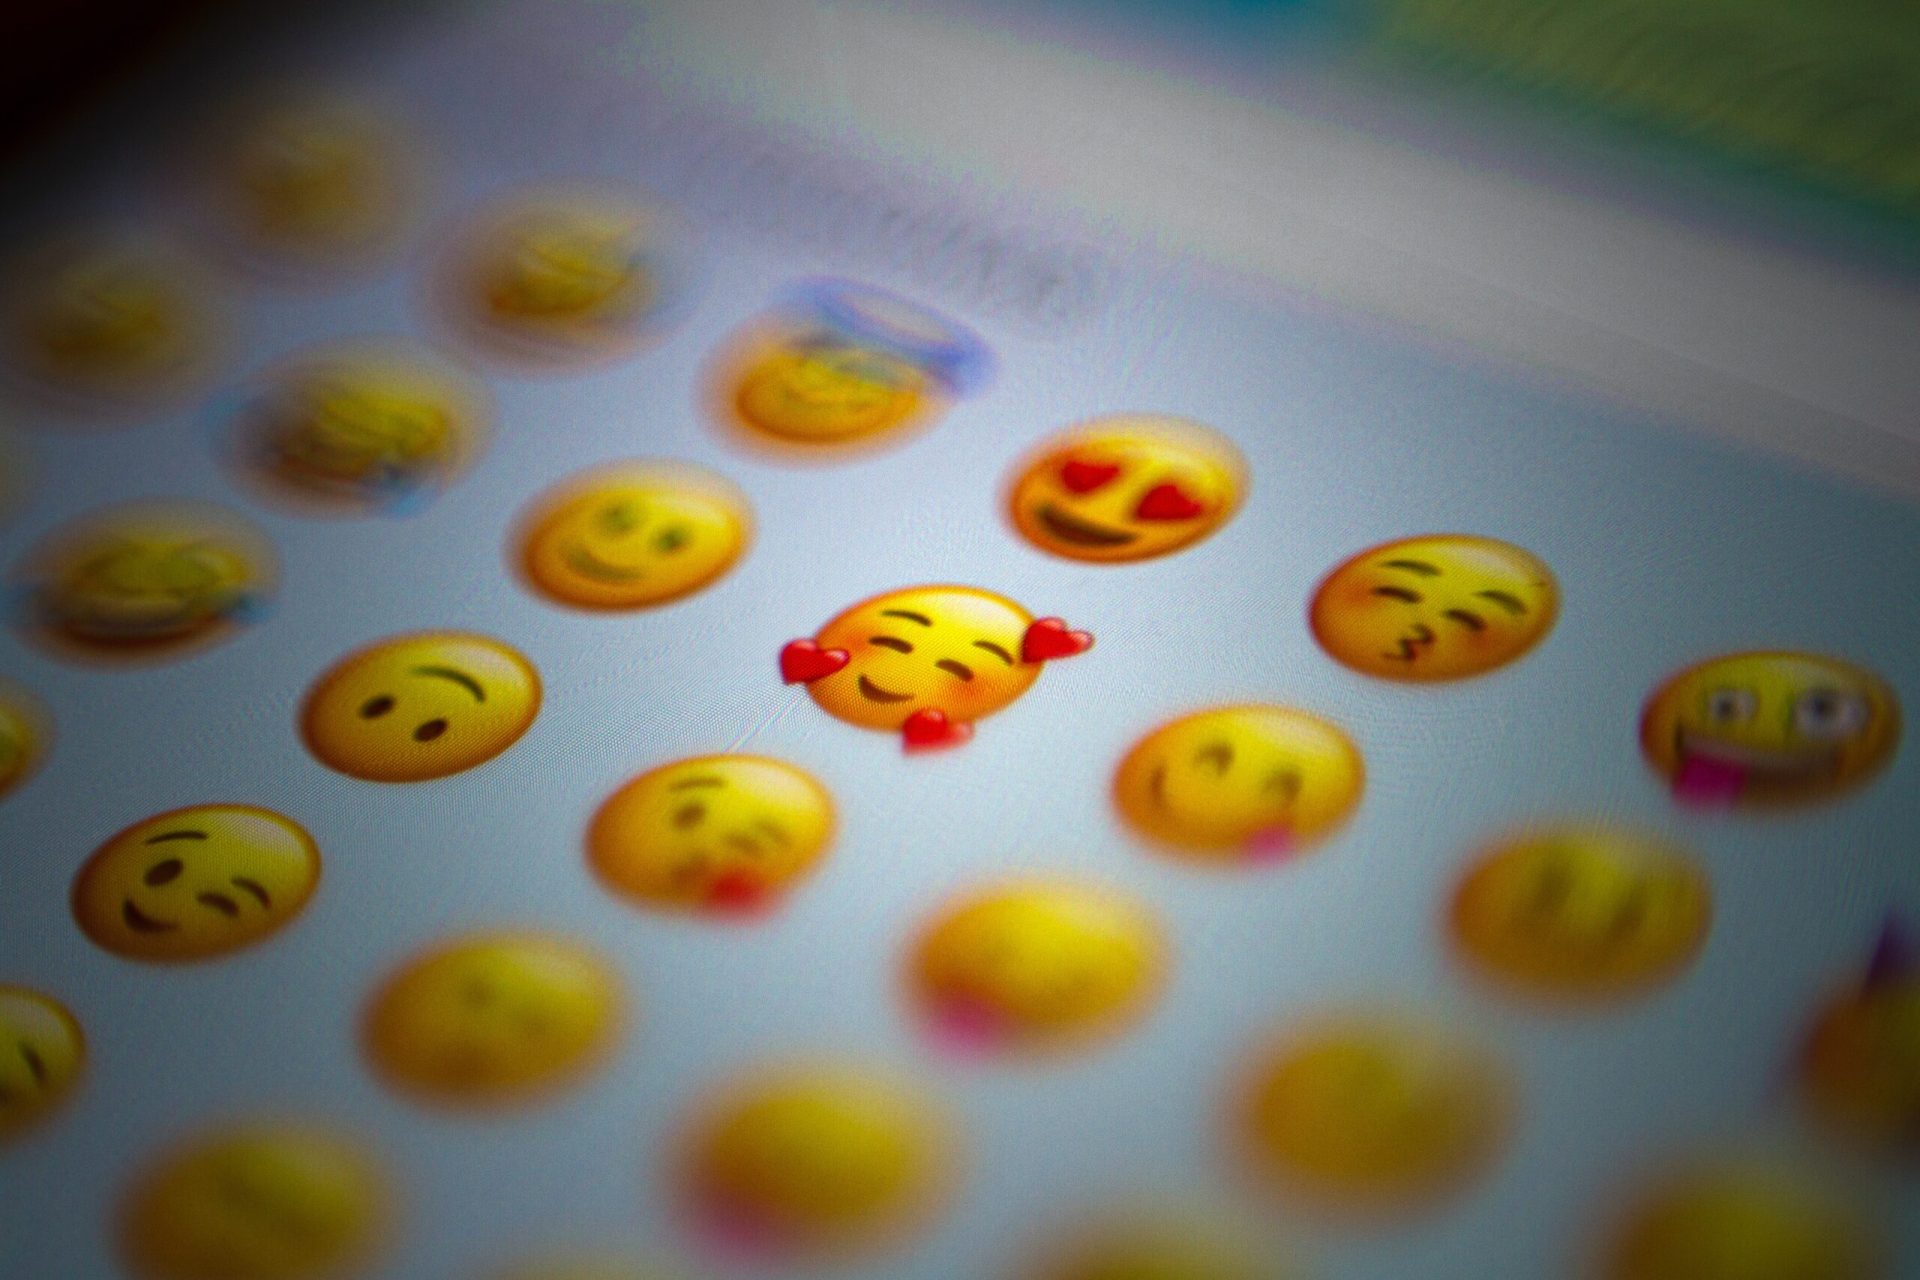 The history of emojis: how to use them in your communications